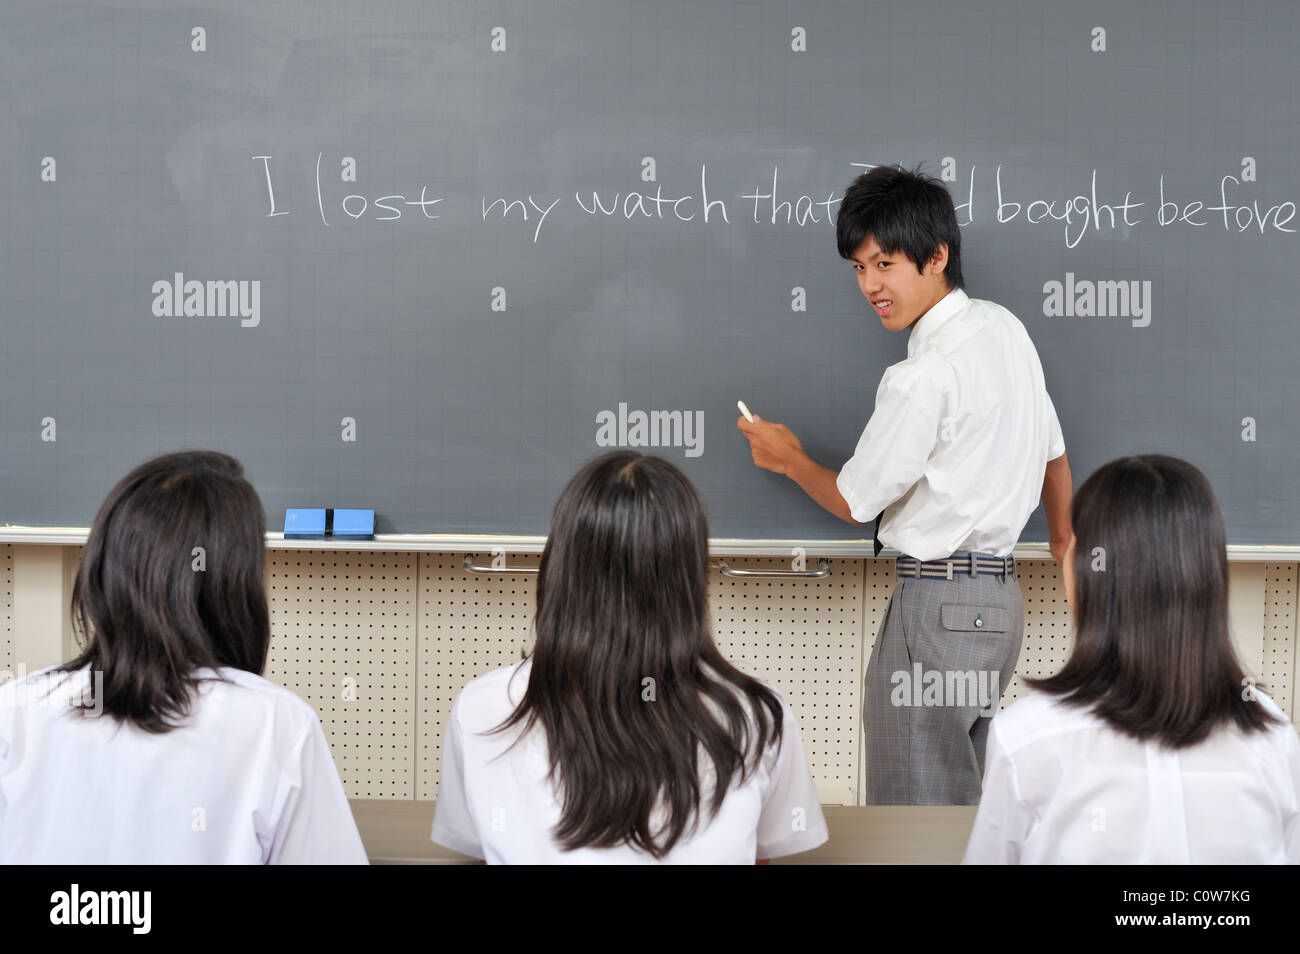 High School Students in Classroom Stock Photo